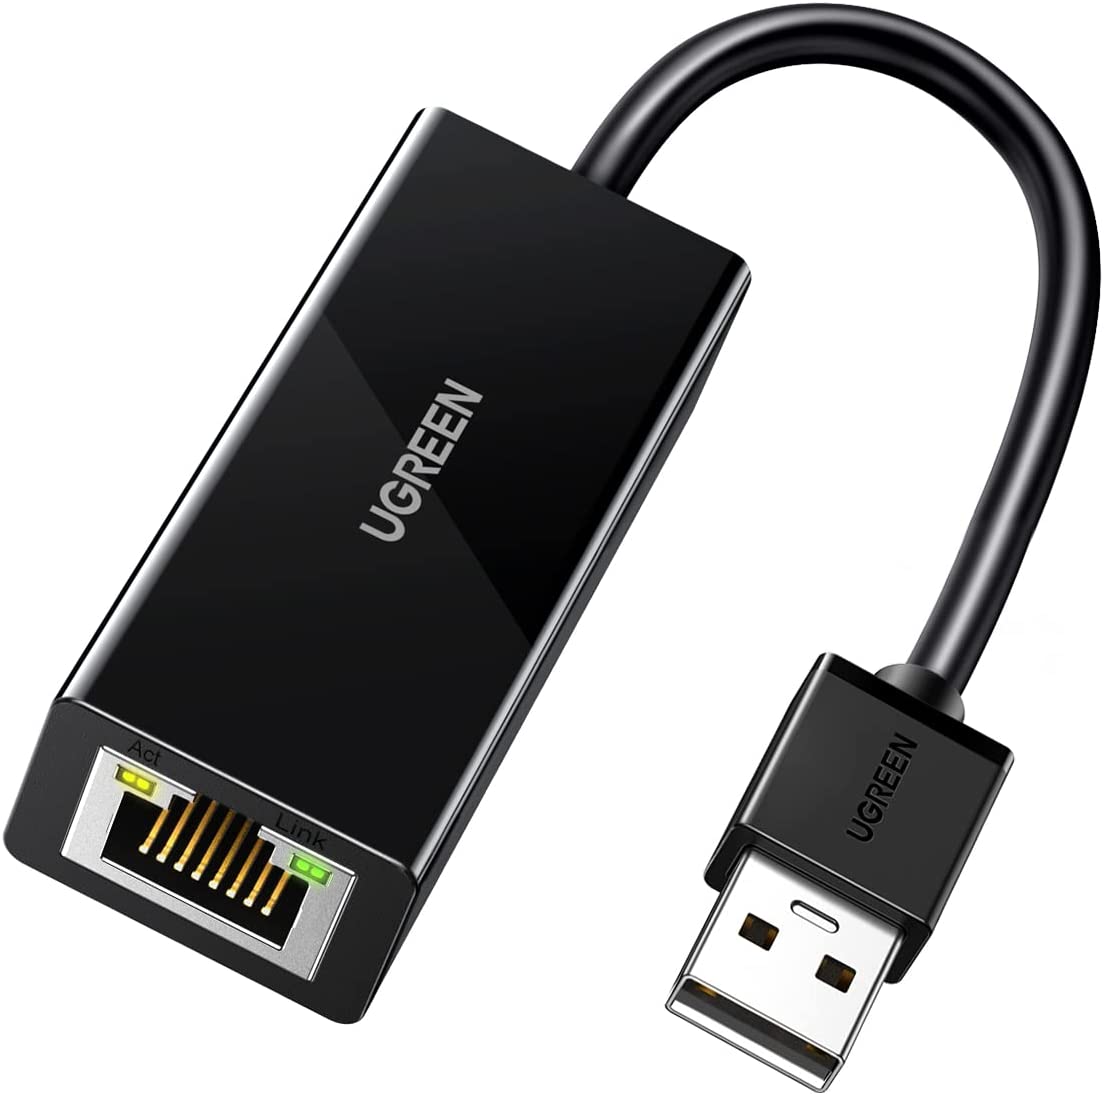 RJ45 Fast Ethernet to USB Network Adapter - 20254